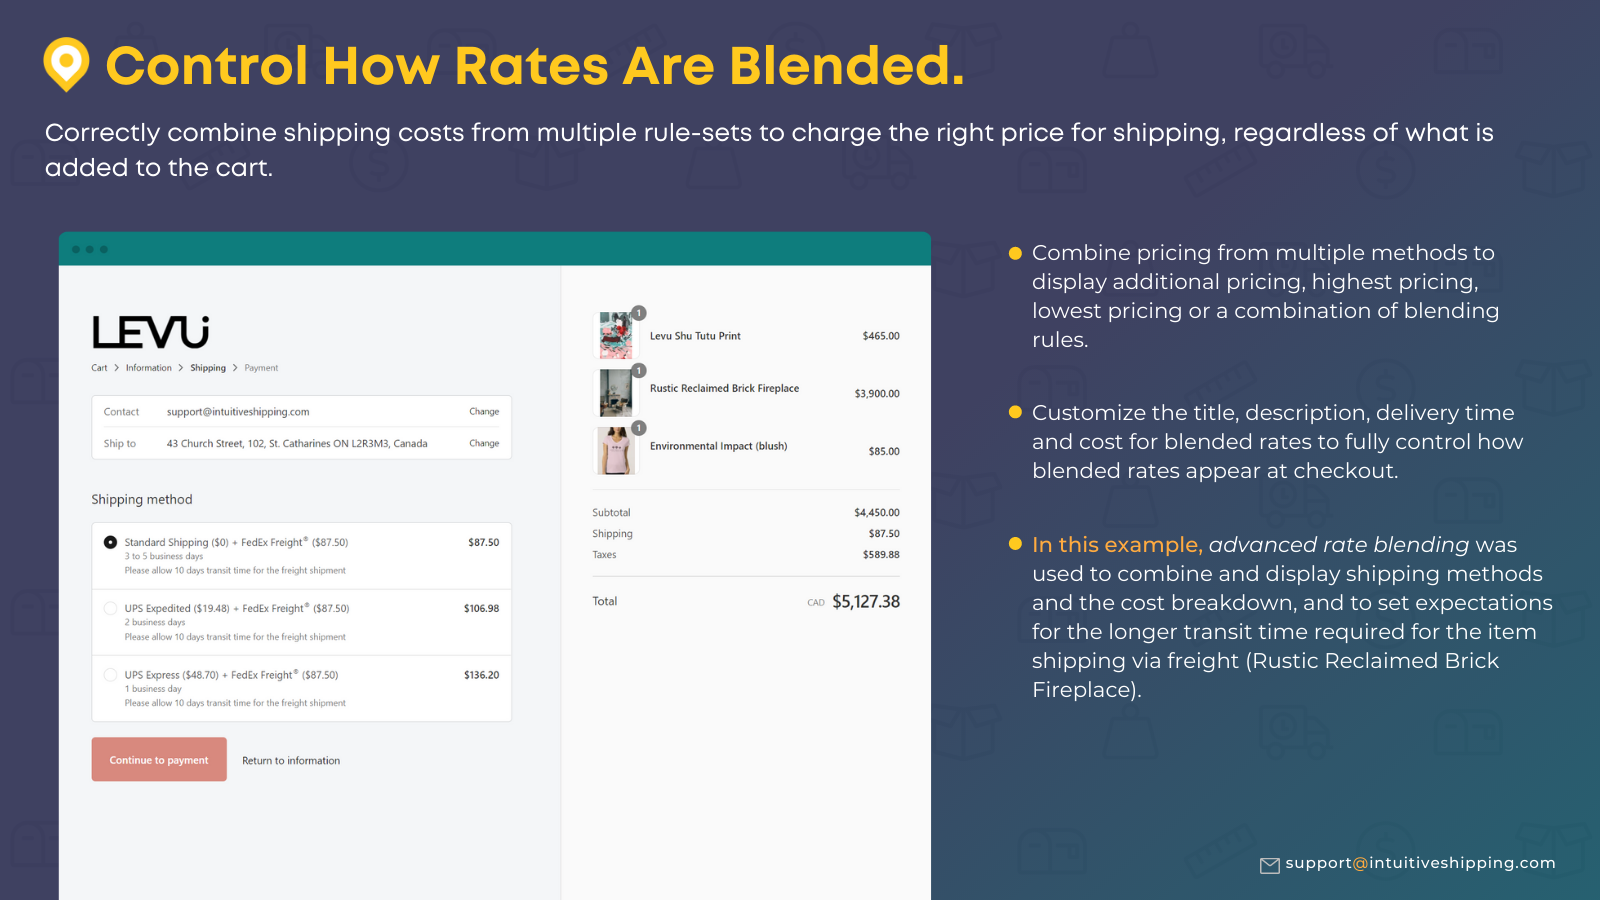 Advanced rate blending for the optimal cost at checkout.